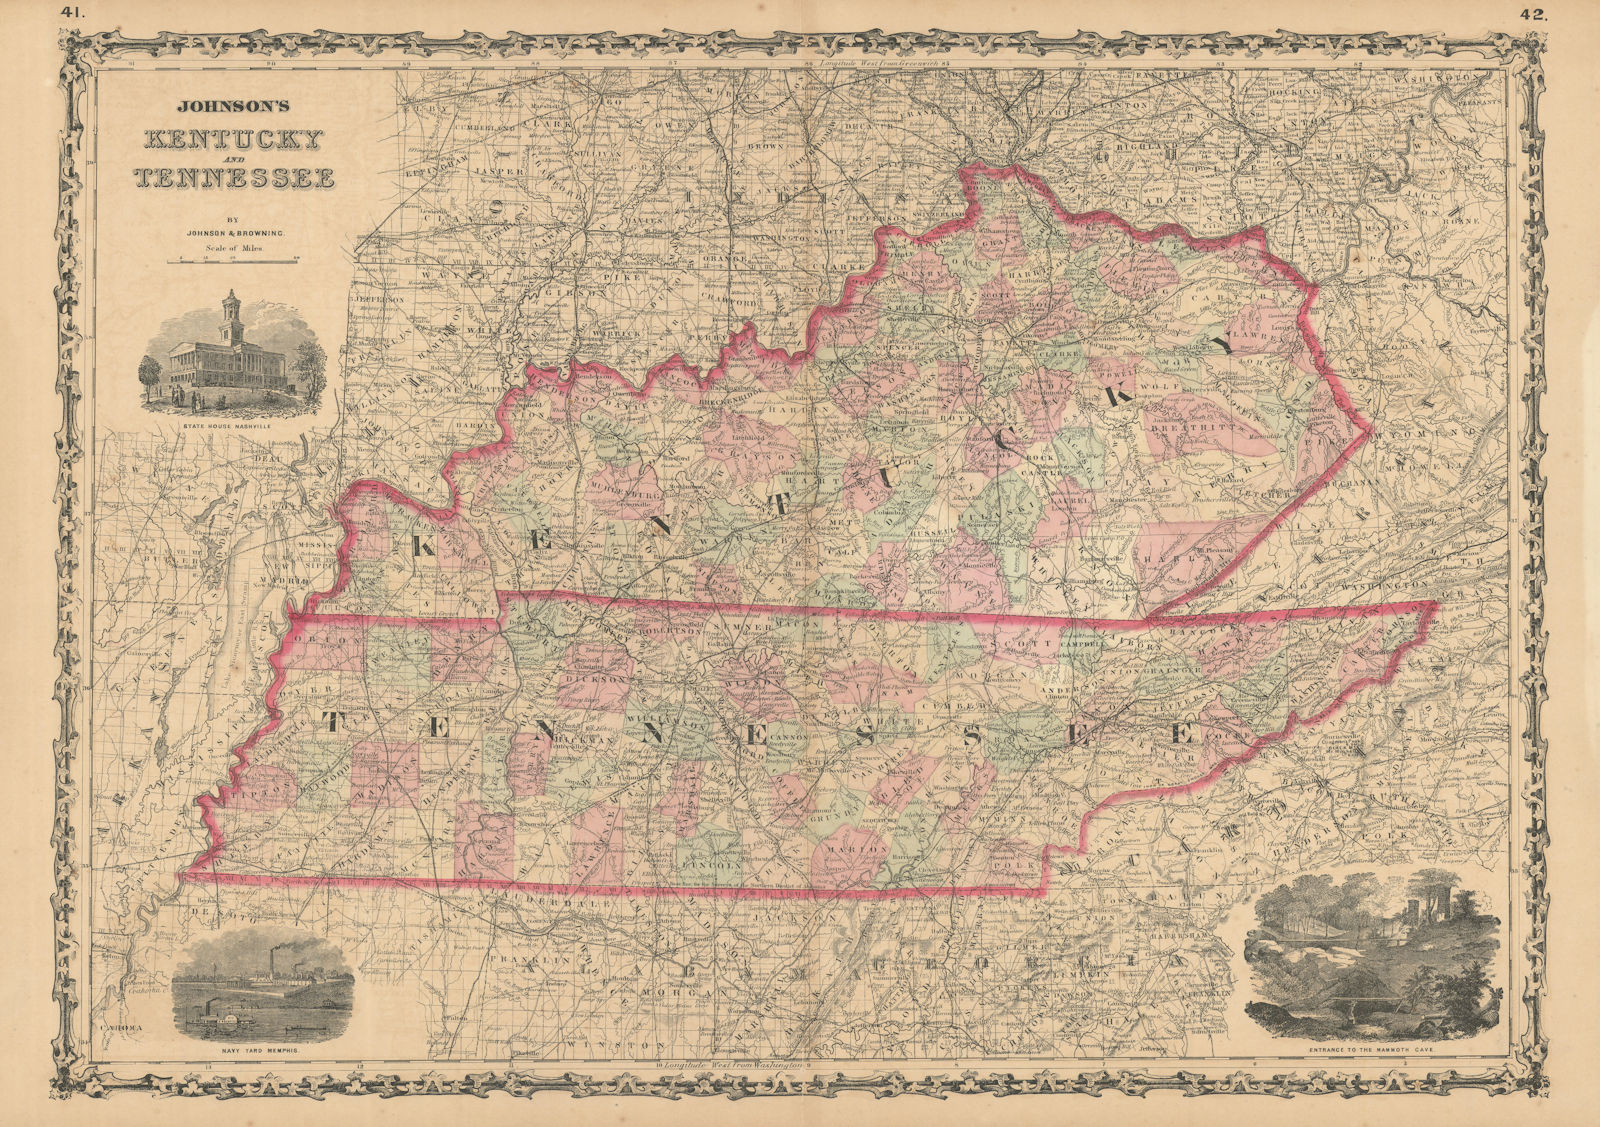 Johnson's Kentucky and Tennessee. US state map showing counties 1861 old